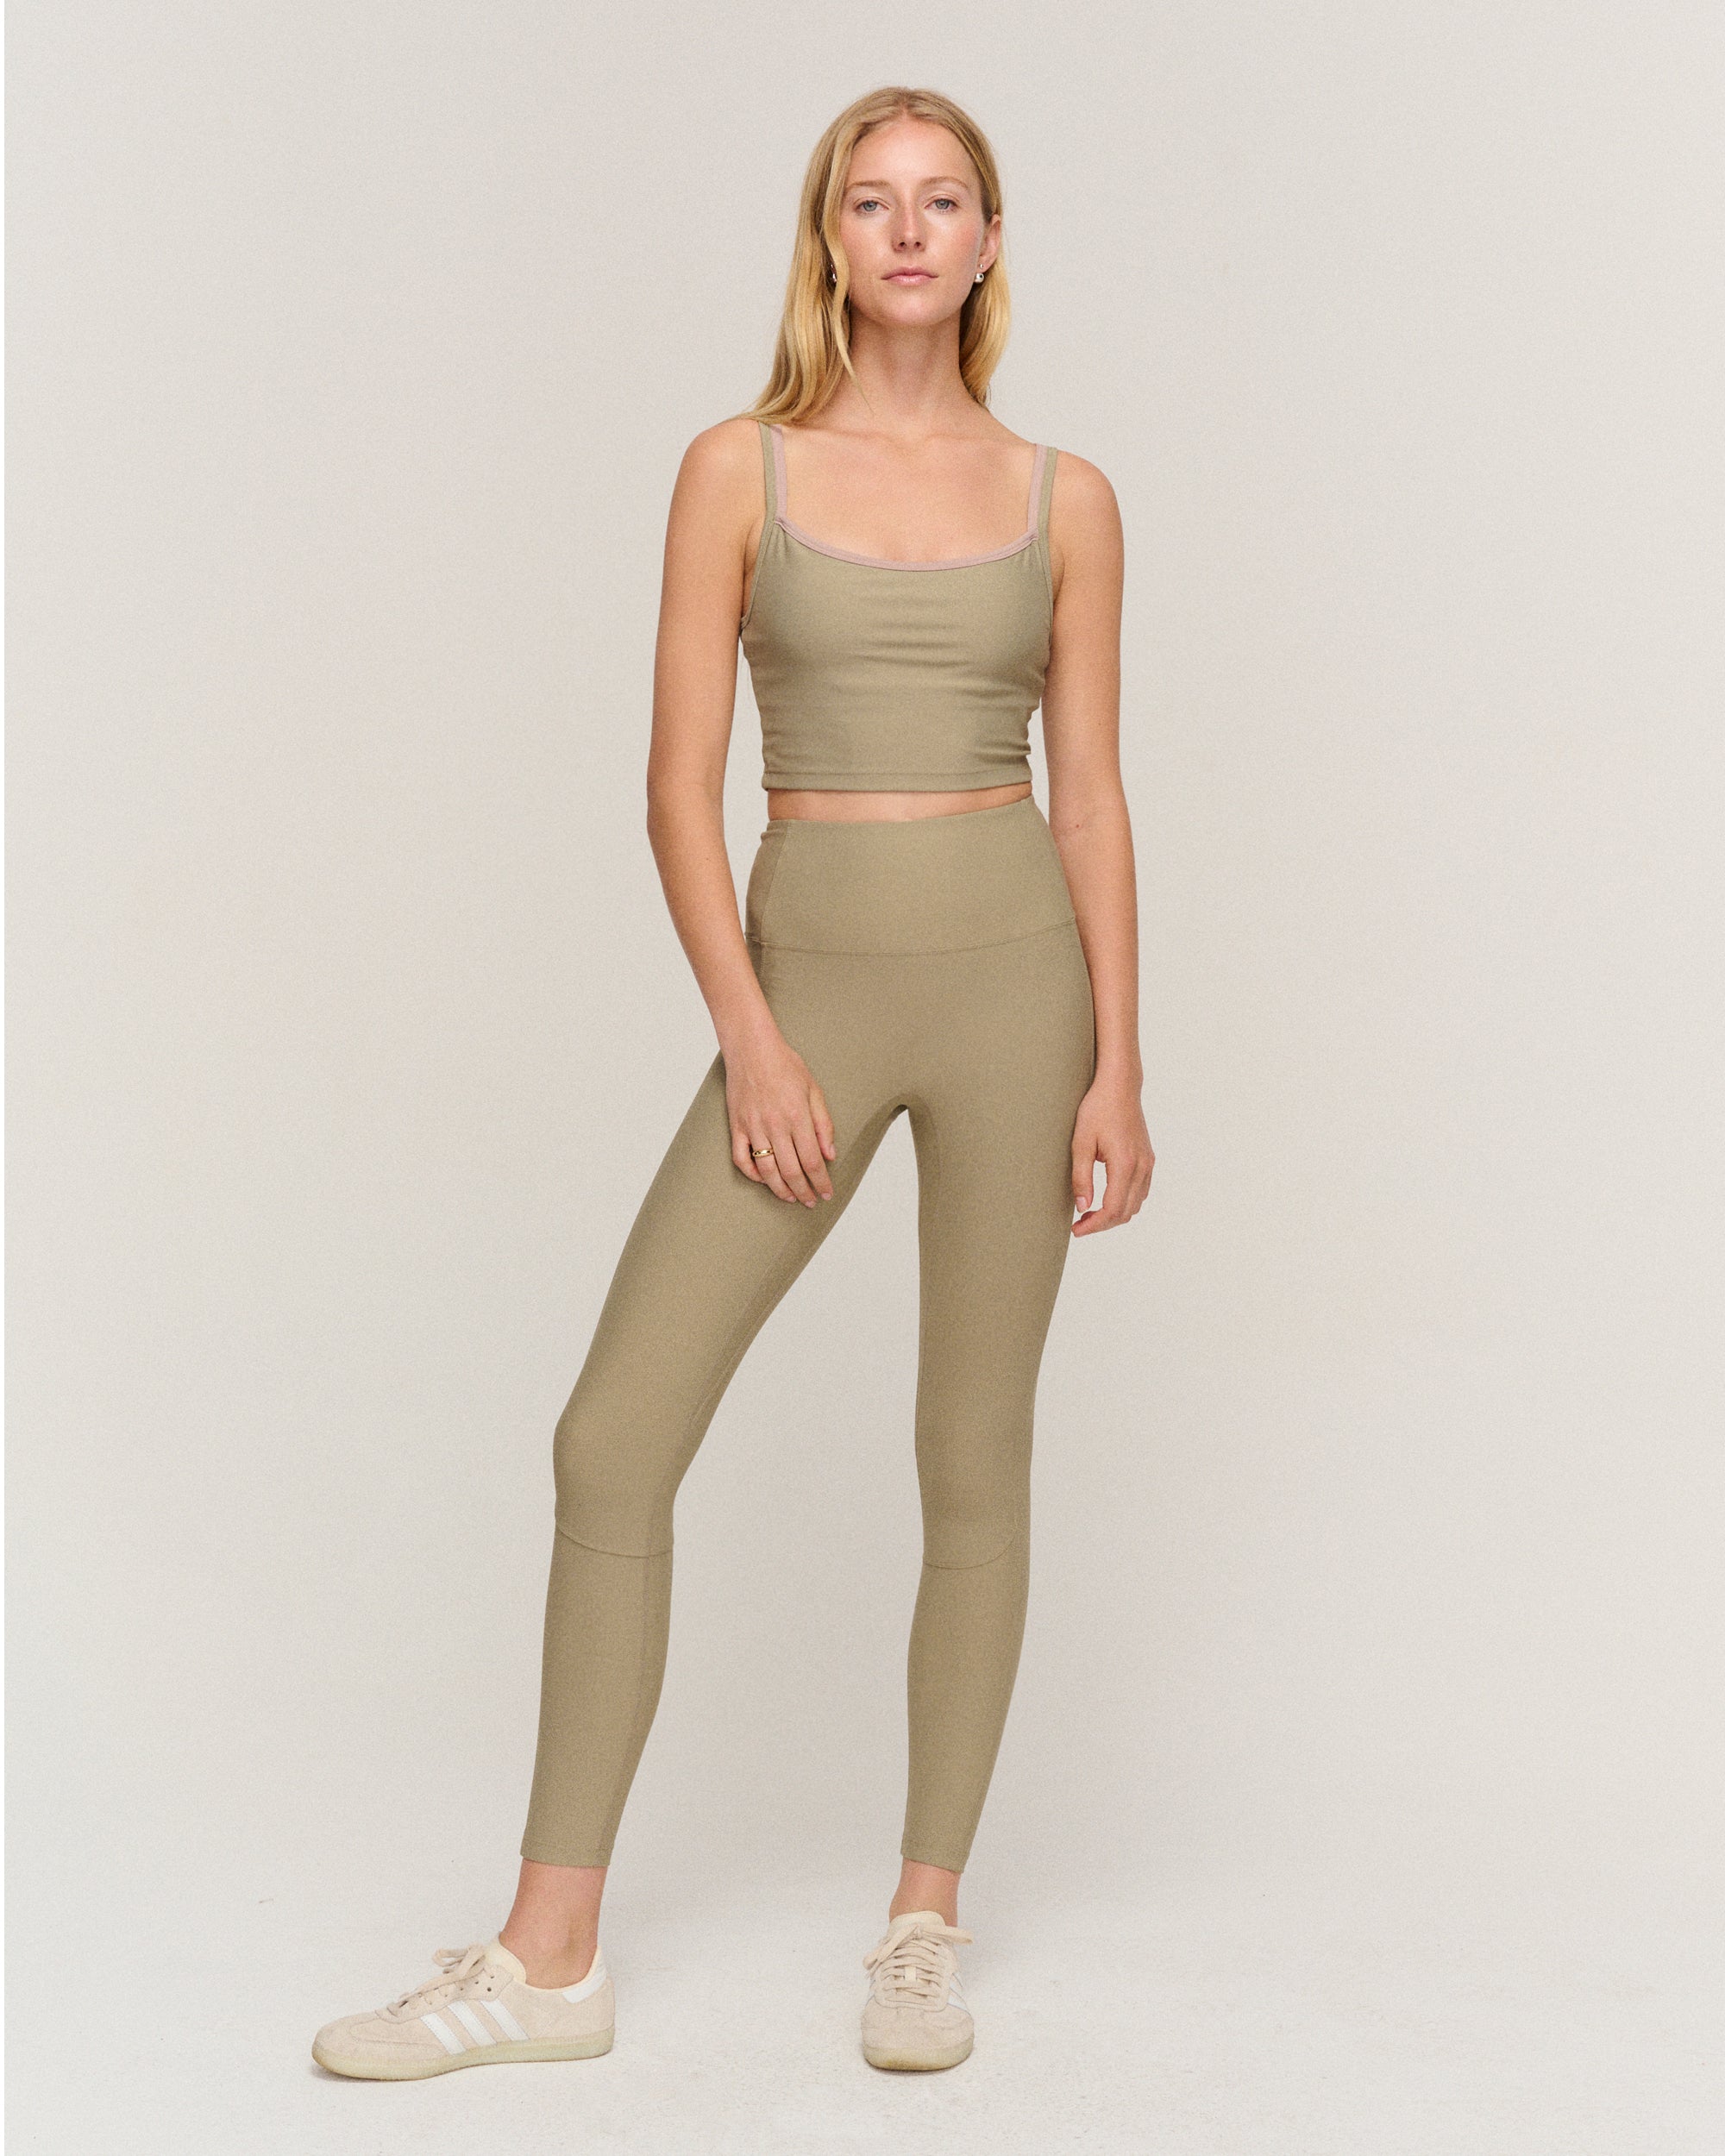 prAna Luxara 7/8 Legging - Women's - Al's Sporting Goods: Your One-Stop  Shop for Outdoor Sports Gear & Apparel